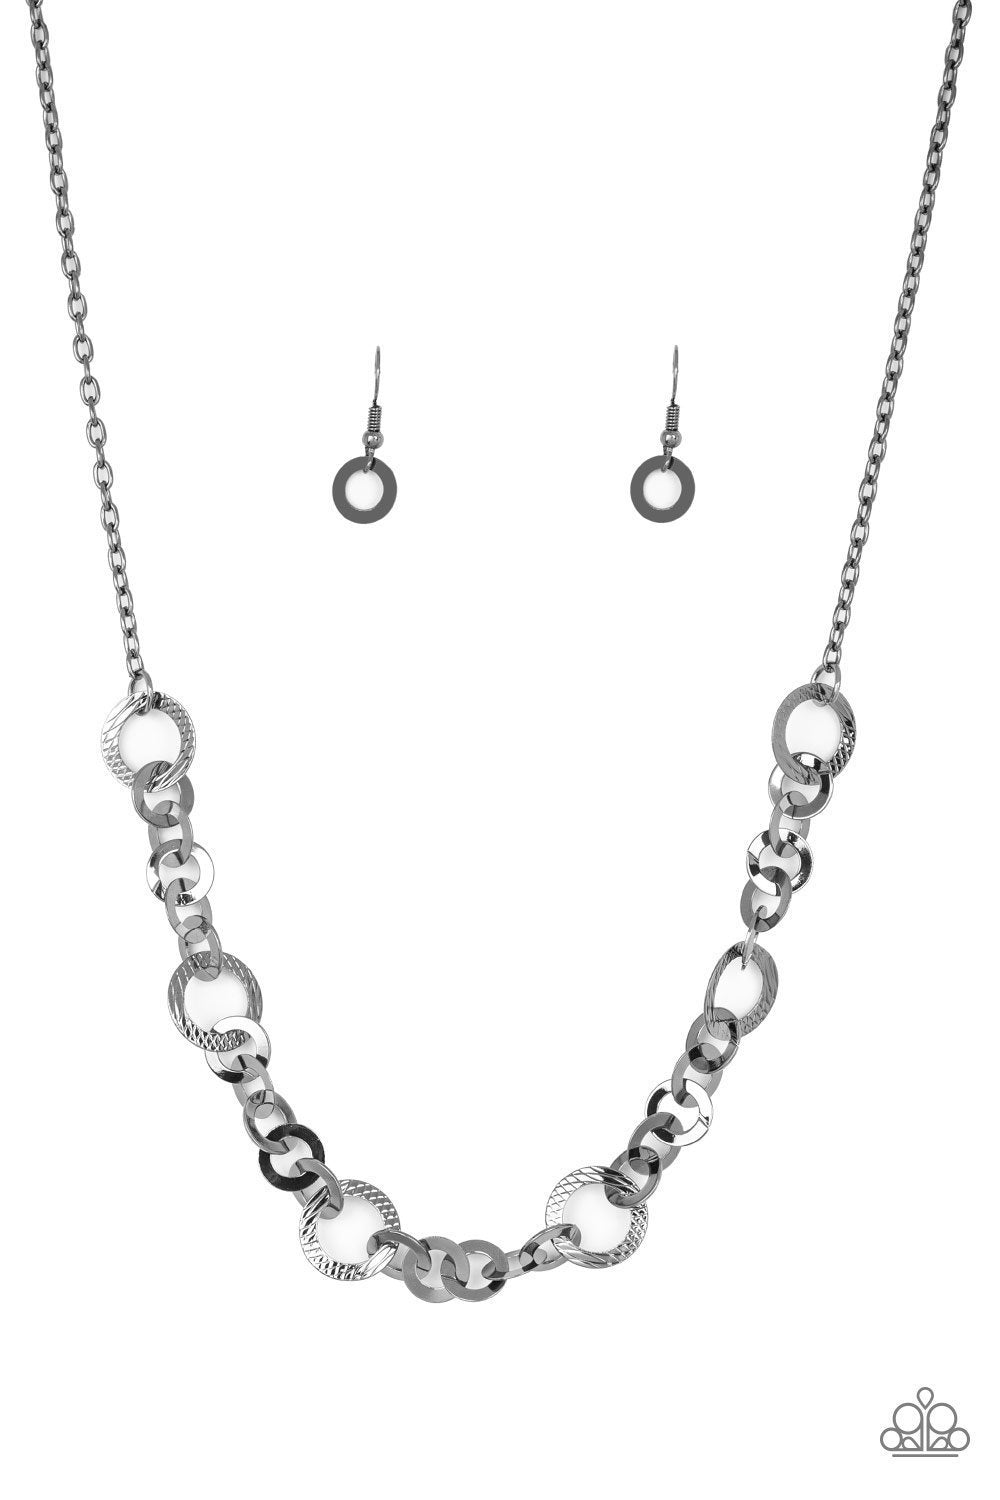 Move It On Over Gunmetal Black Necklace - Paparazzi Accessories - lightbox -CarasShop.com - $5 Jewelry by Cara Jewels